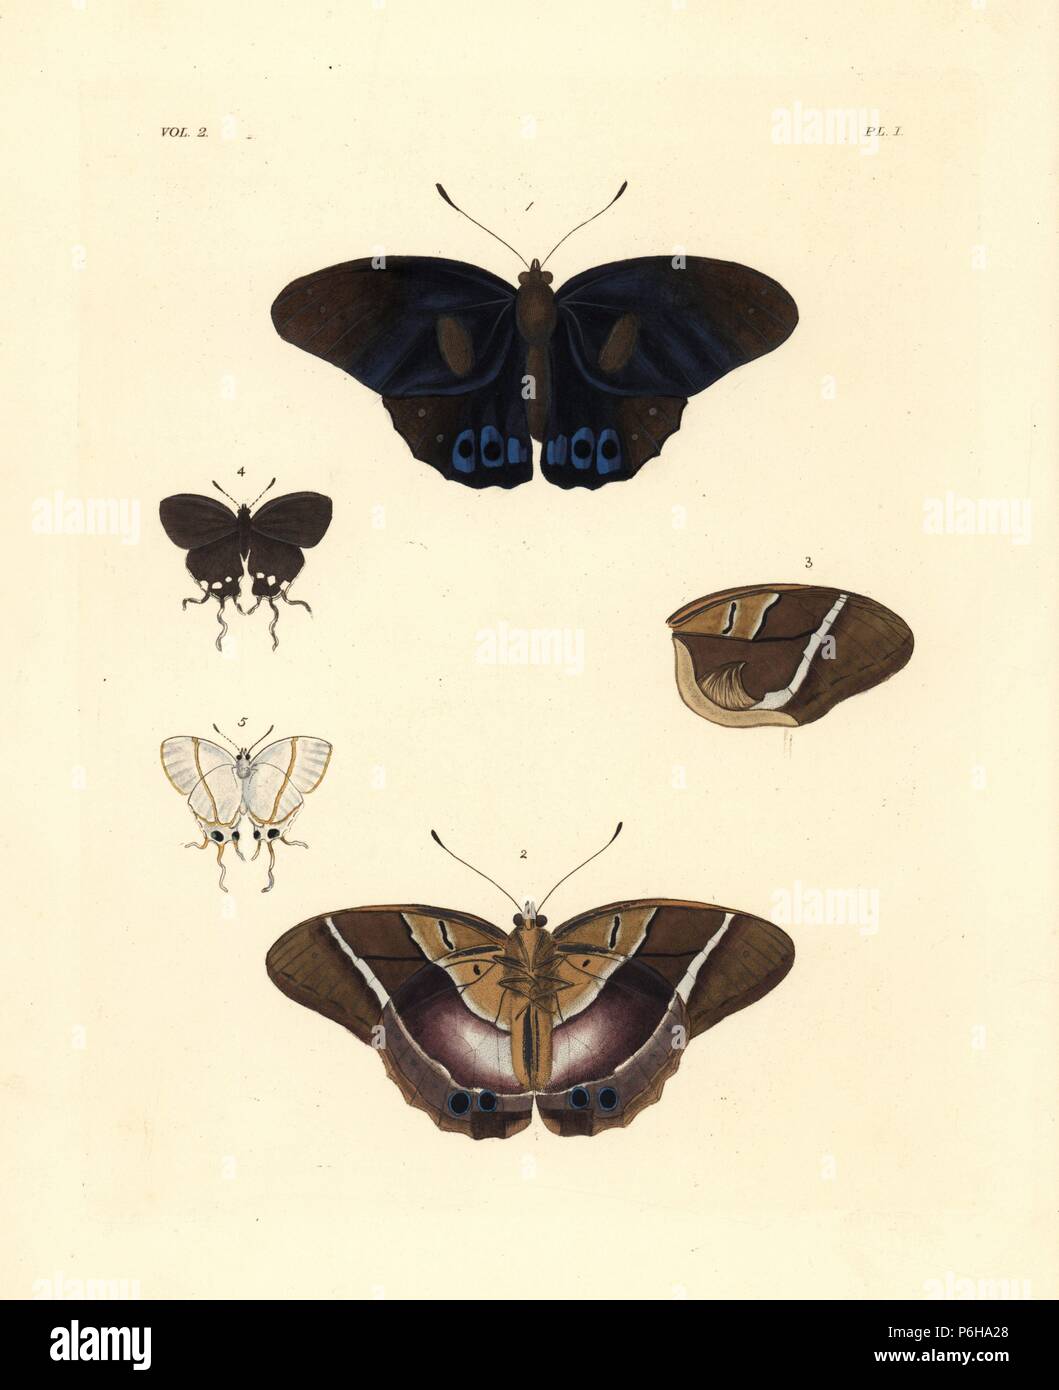 Common brown morpho, Antirrhea philoctetes (Haetera philoctetes) 1,2, wing 3, common falsehead butterfly, Oxylides faunus (Thecla faunus) female 4,5, ventral and dorsal views. Handcoloured lithograph from John O. Westwood's new edition of Dru Drury's 'Illustrations of Exotic Entomology,' Bohn, London, 1837. Stock Photo